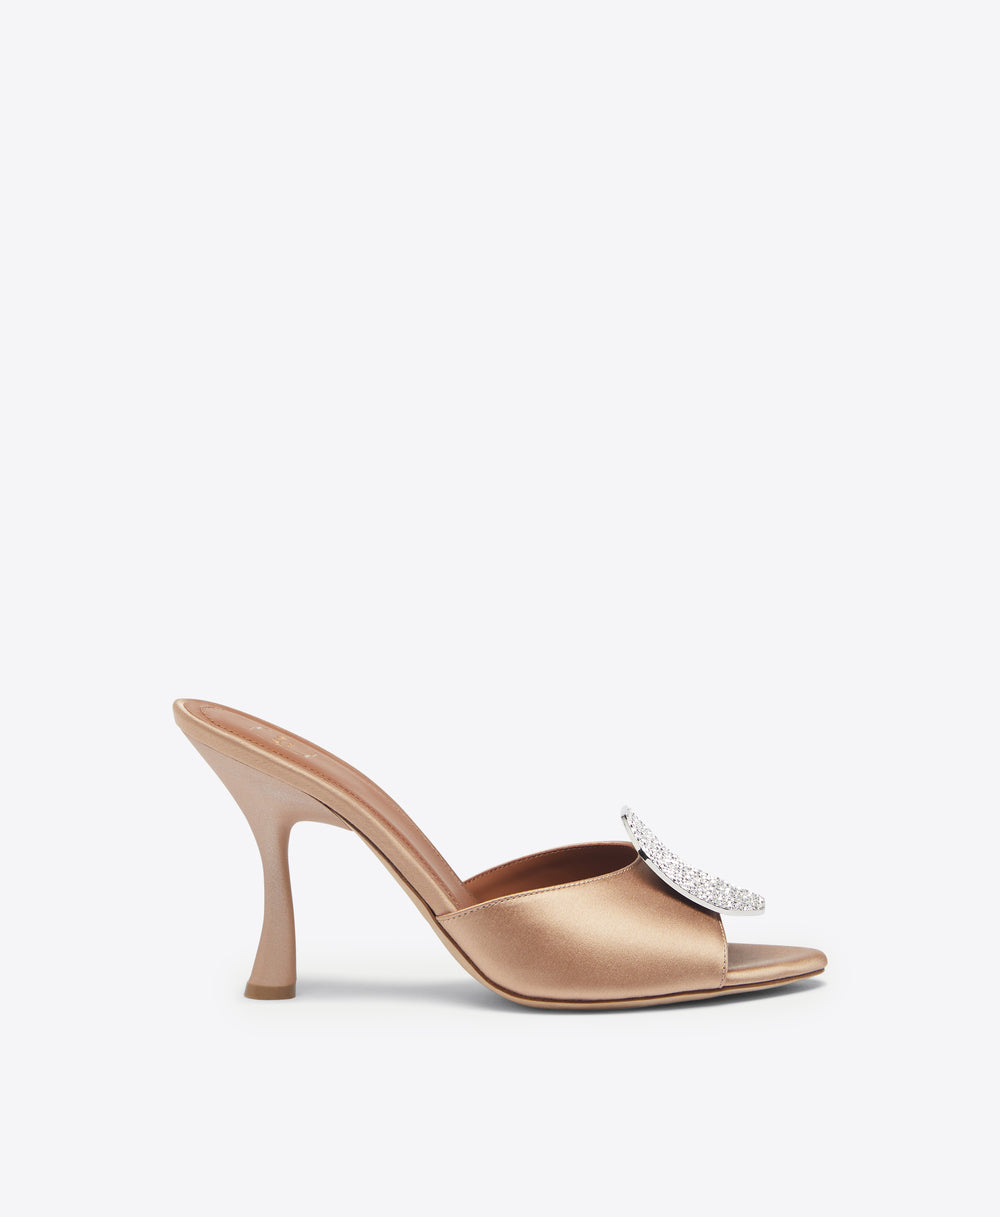 Malone Souliers Josia 90mm Sepia Satin Heeled Sandals